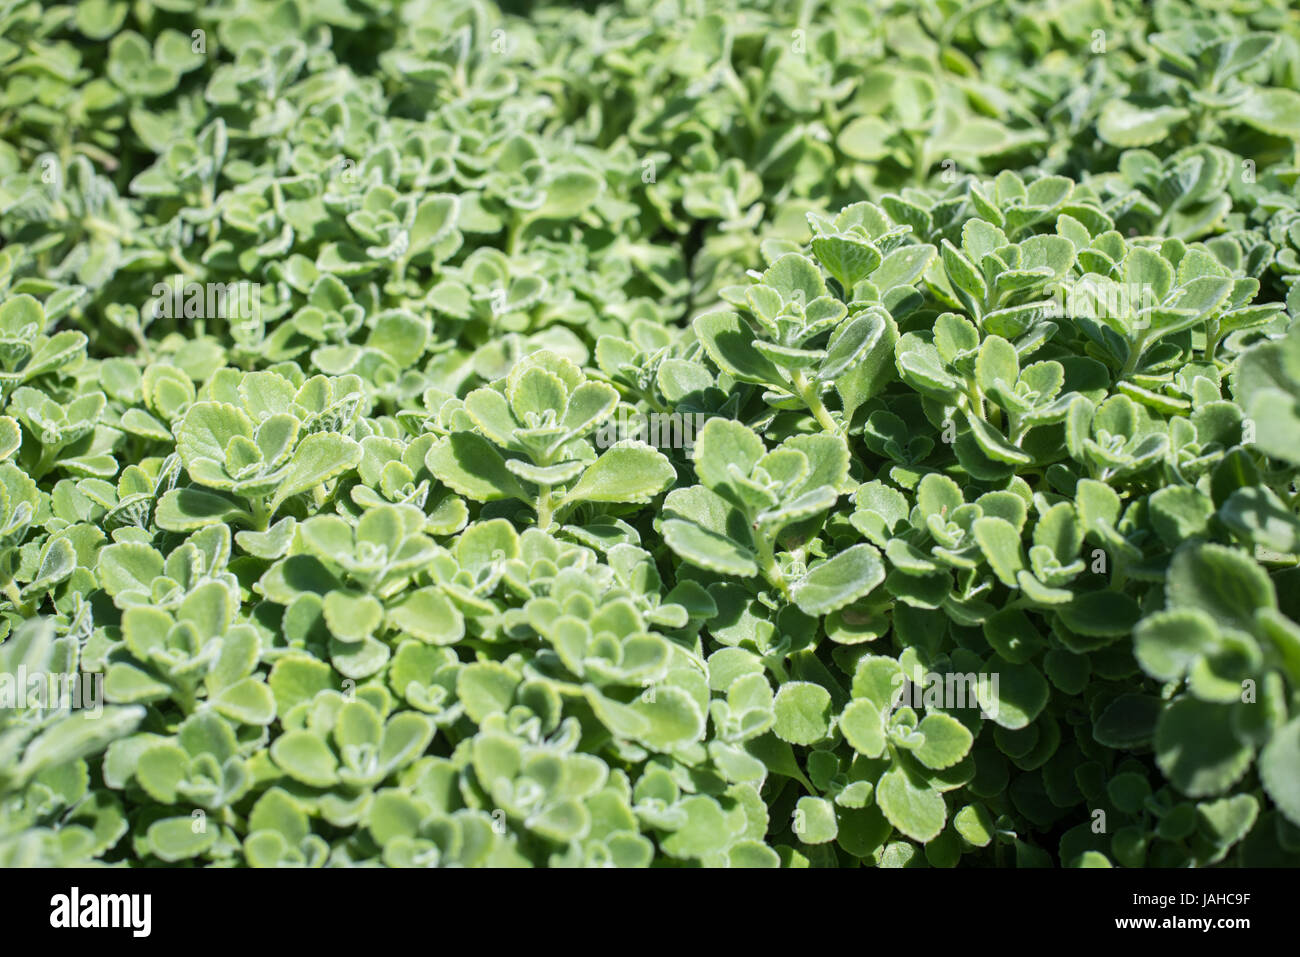 Plectranthus amboinicus green plant leaves close up selective focus Stock Photo